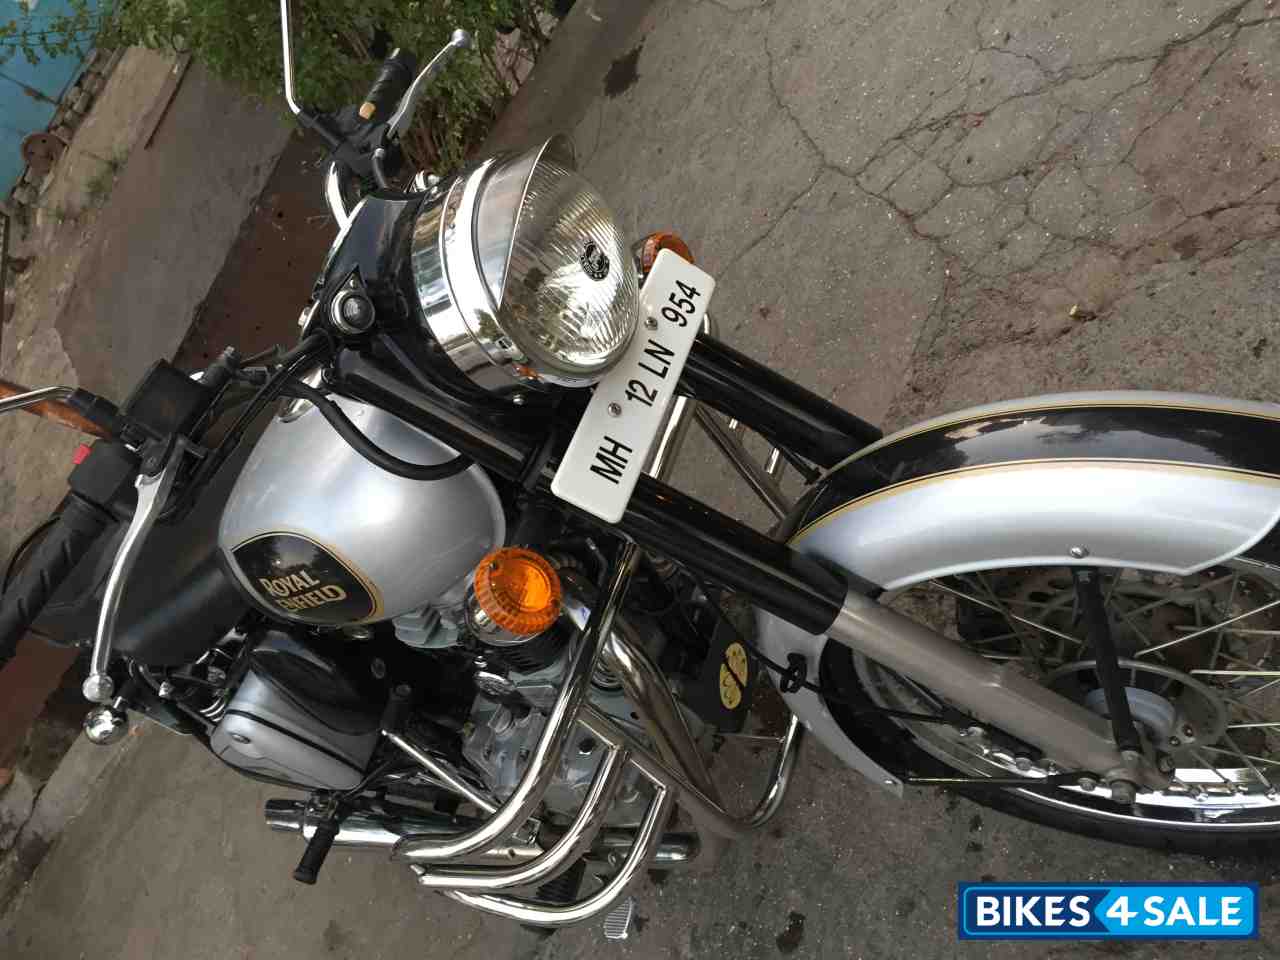 Silver Royal Enfield Classic 500